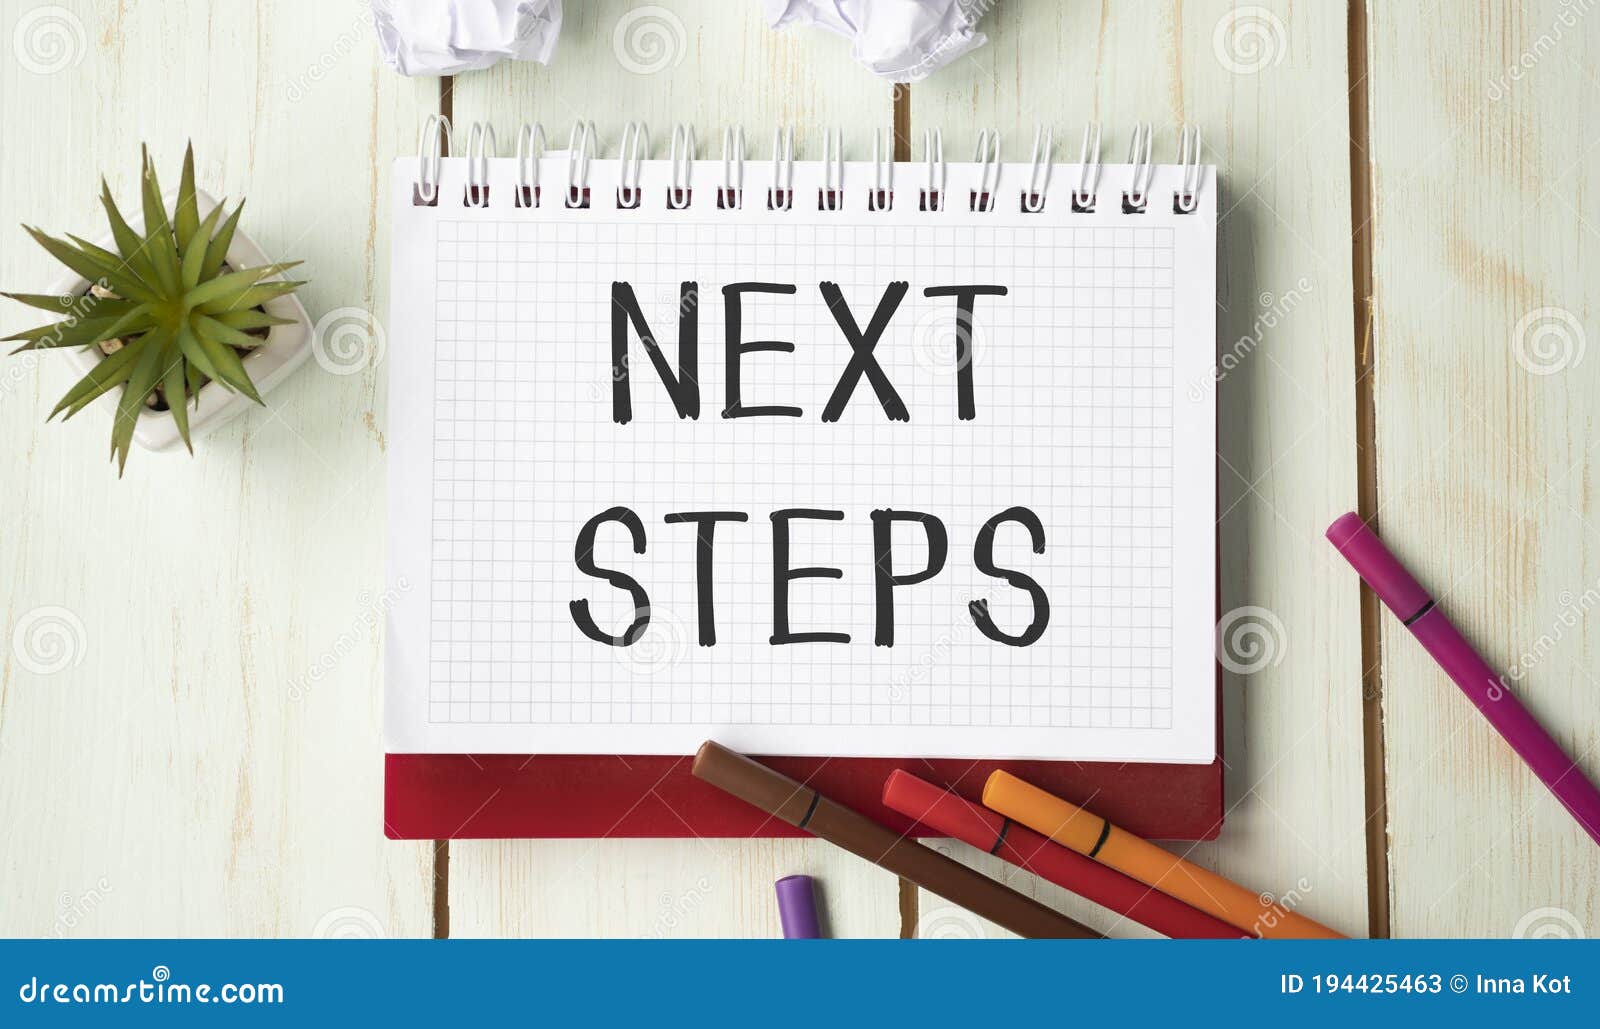 3 309 Next Steps Photos Free Royalty Free Stock Photos From Dreamstime